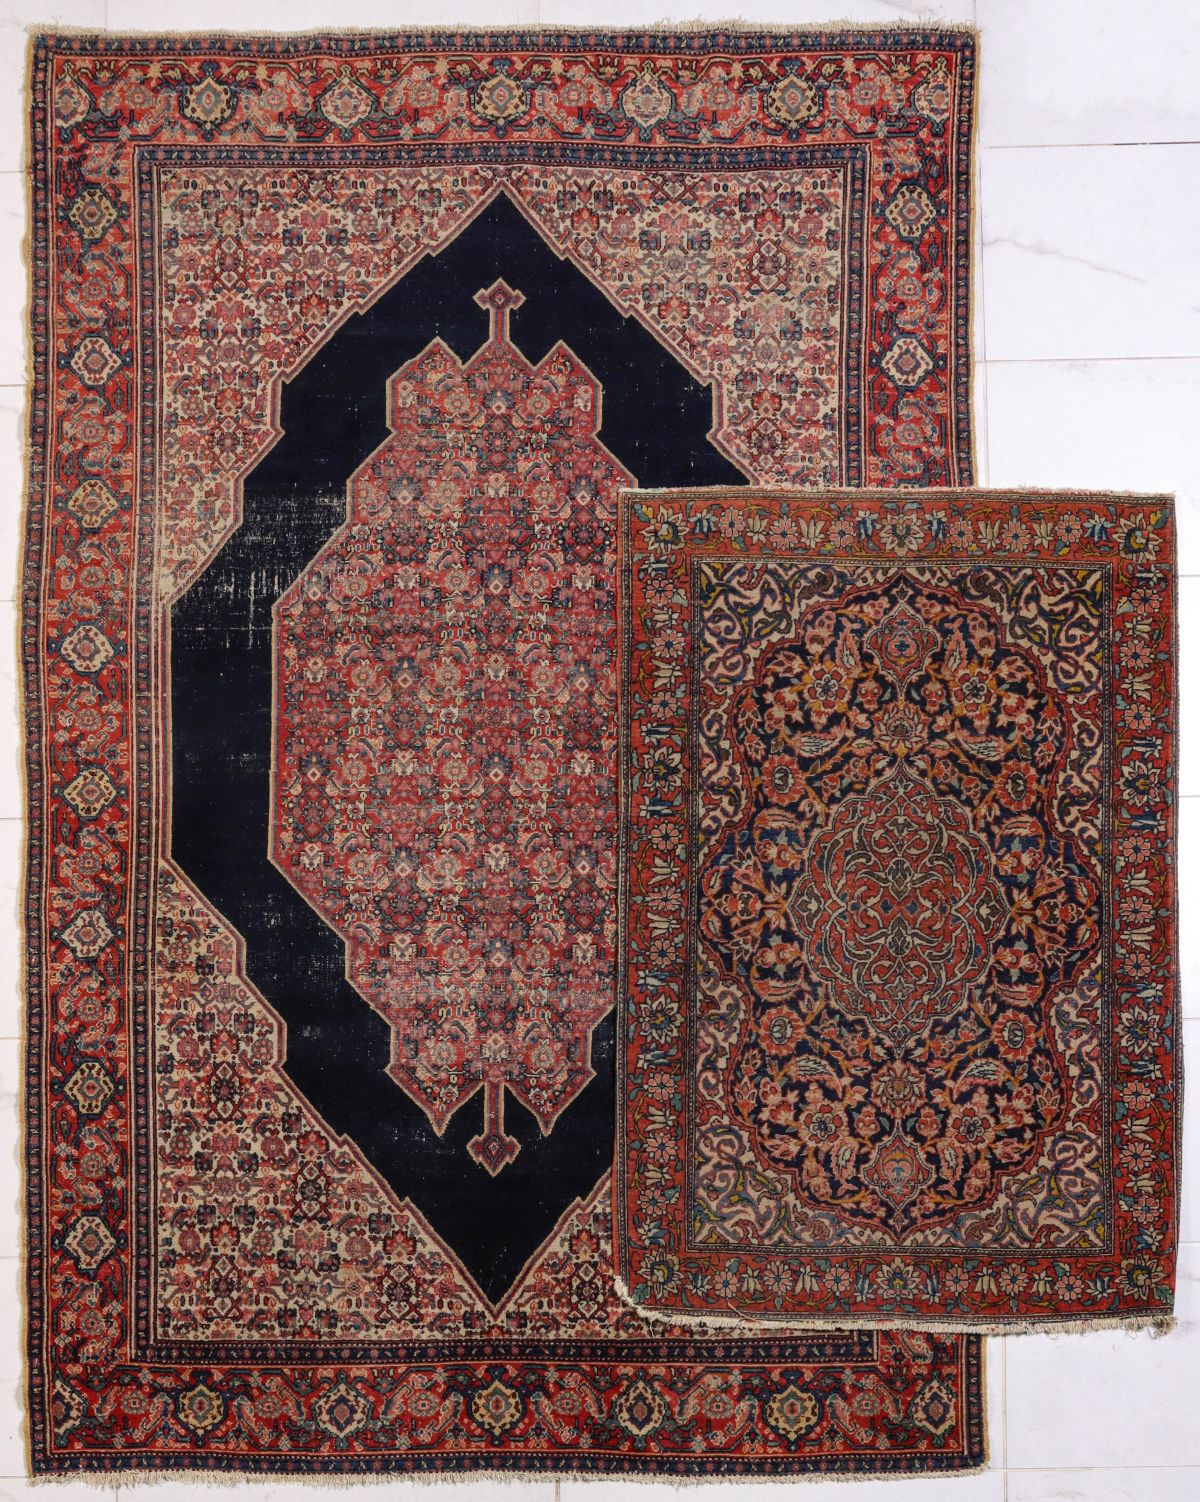 TWO PERSIAN RUGS INCLUDING ANTIQUE SENNEH